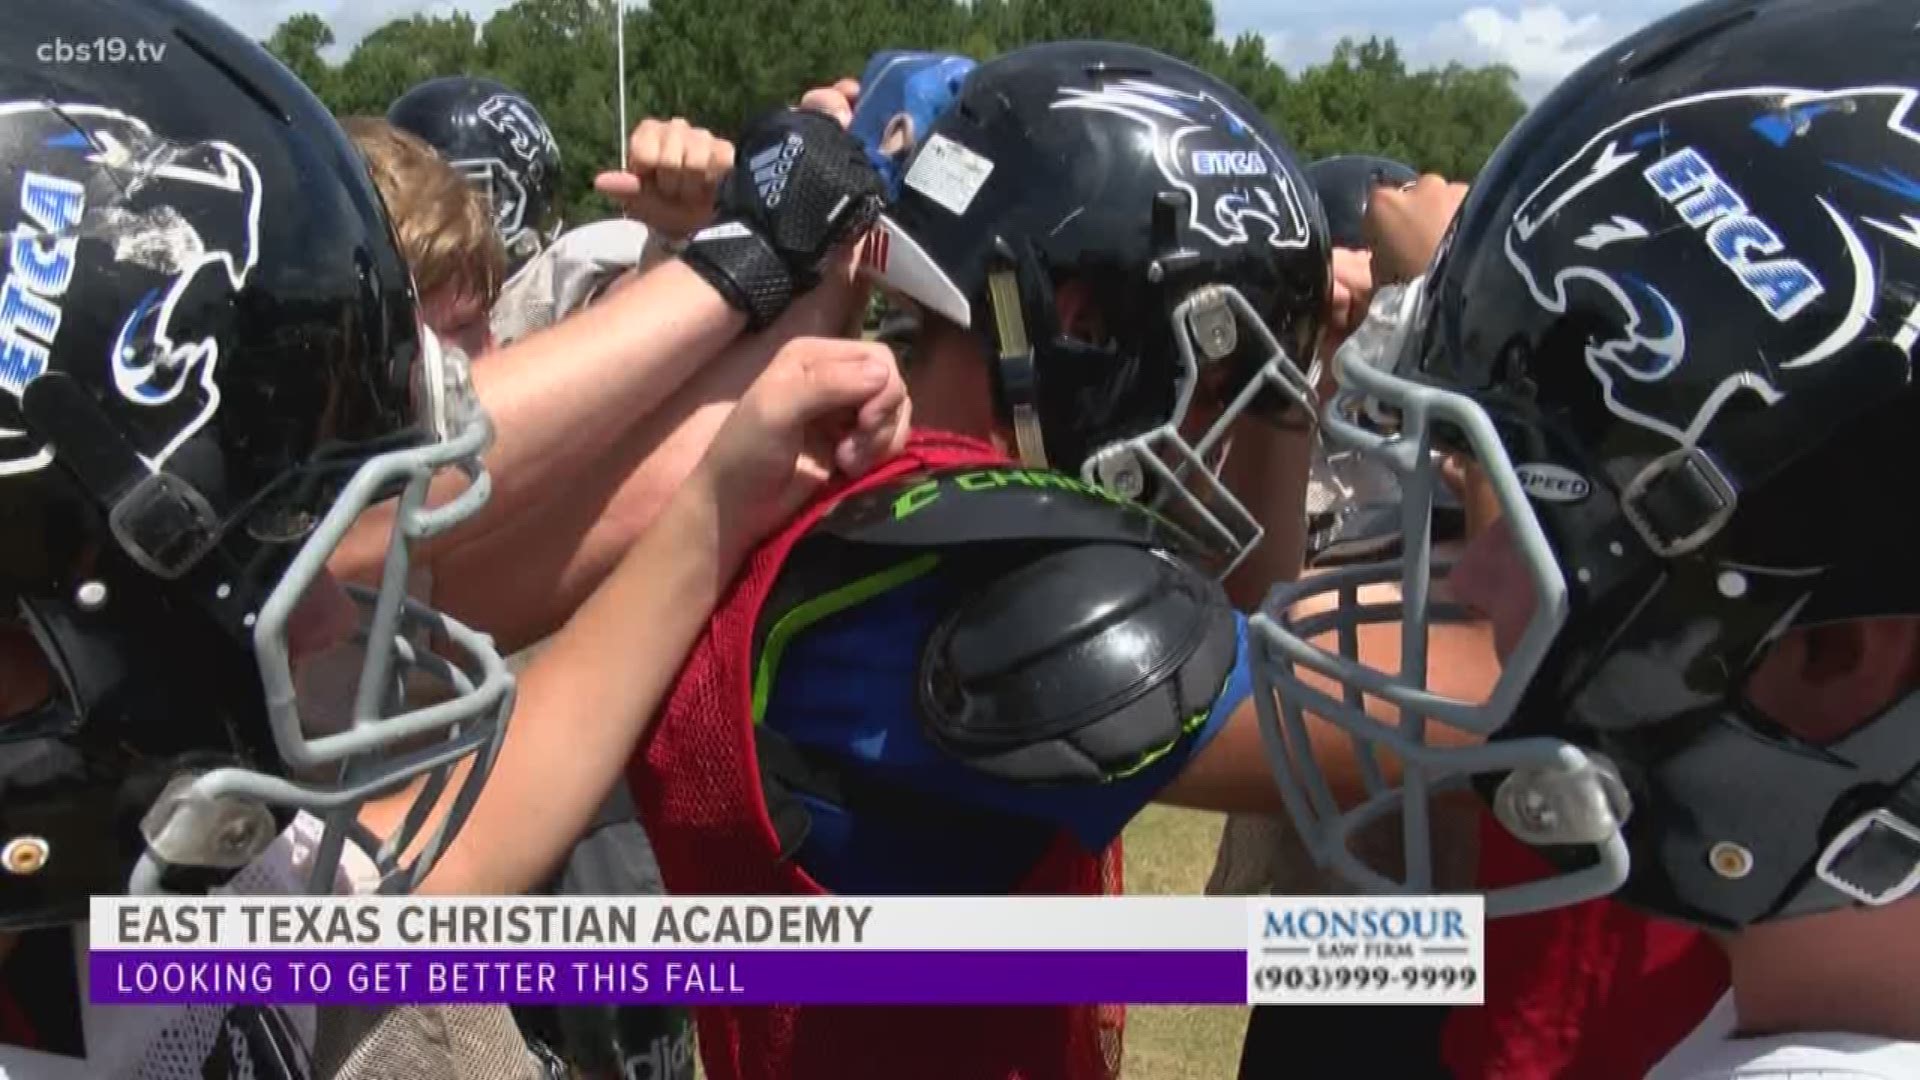 East Texas Christian Academy is about to embark on their third season as a program. After a winless campaign in 2017, the Panthers rattled off two wins last season and hope to build on that momentum in 2019.